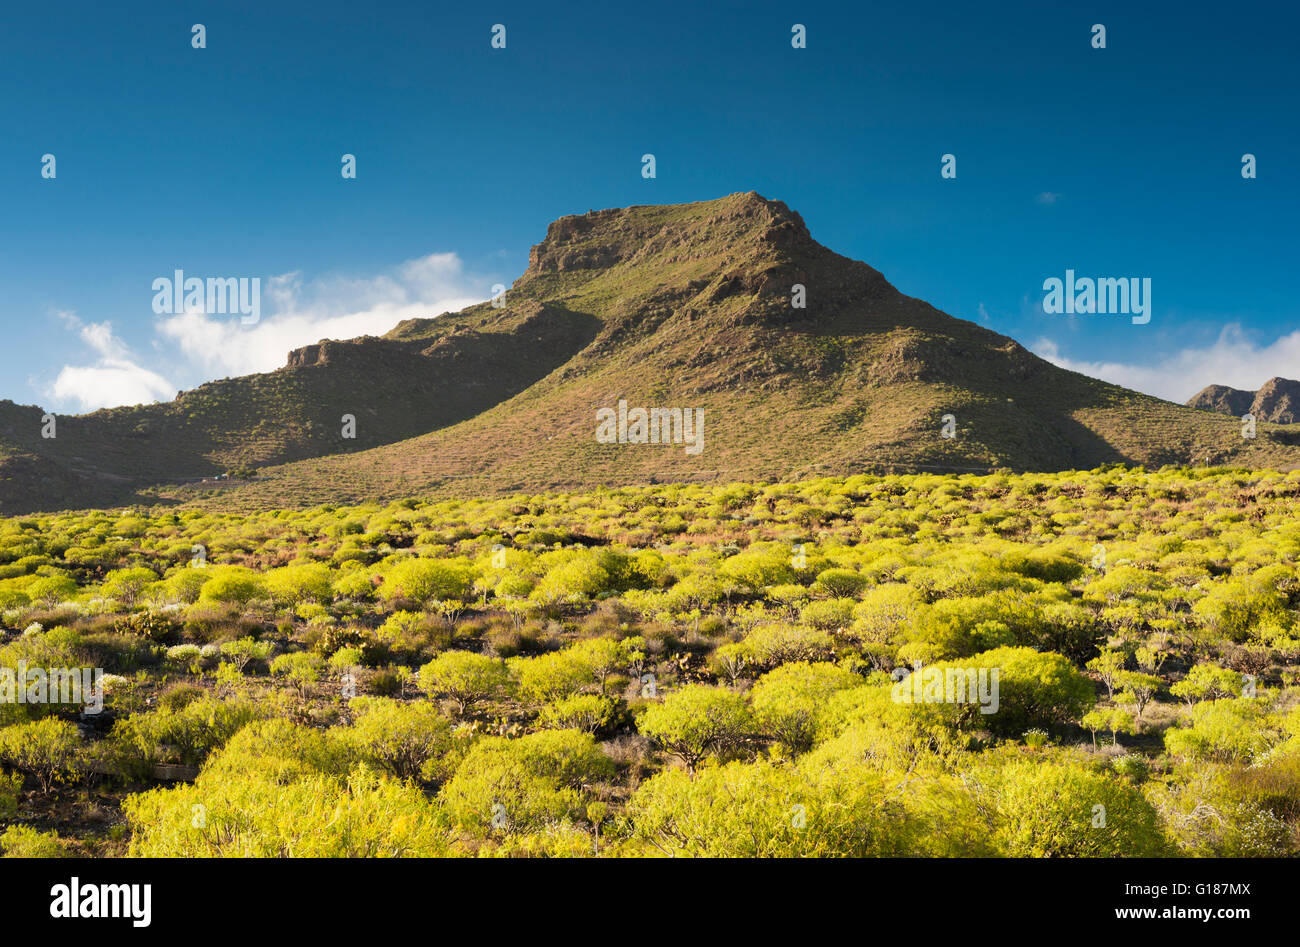 The iconic mountain of Roque del Conde, southern Tenerife, in spring, with typical flora of this semi-arid region in foreground Stock Photo